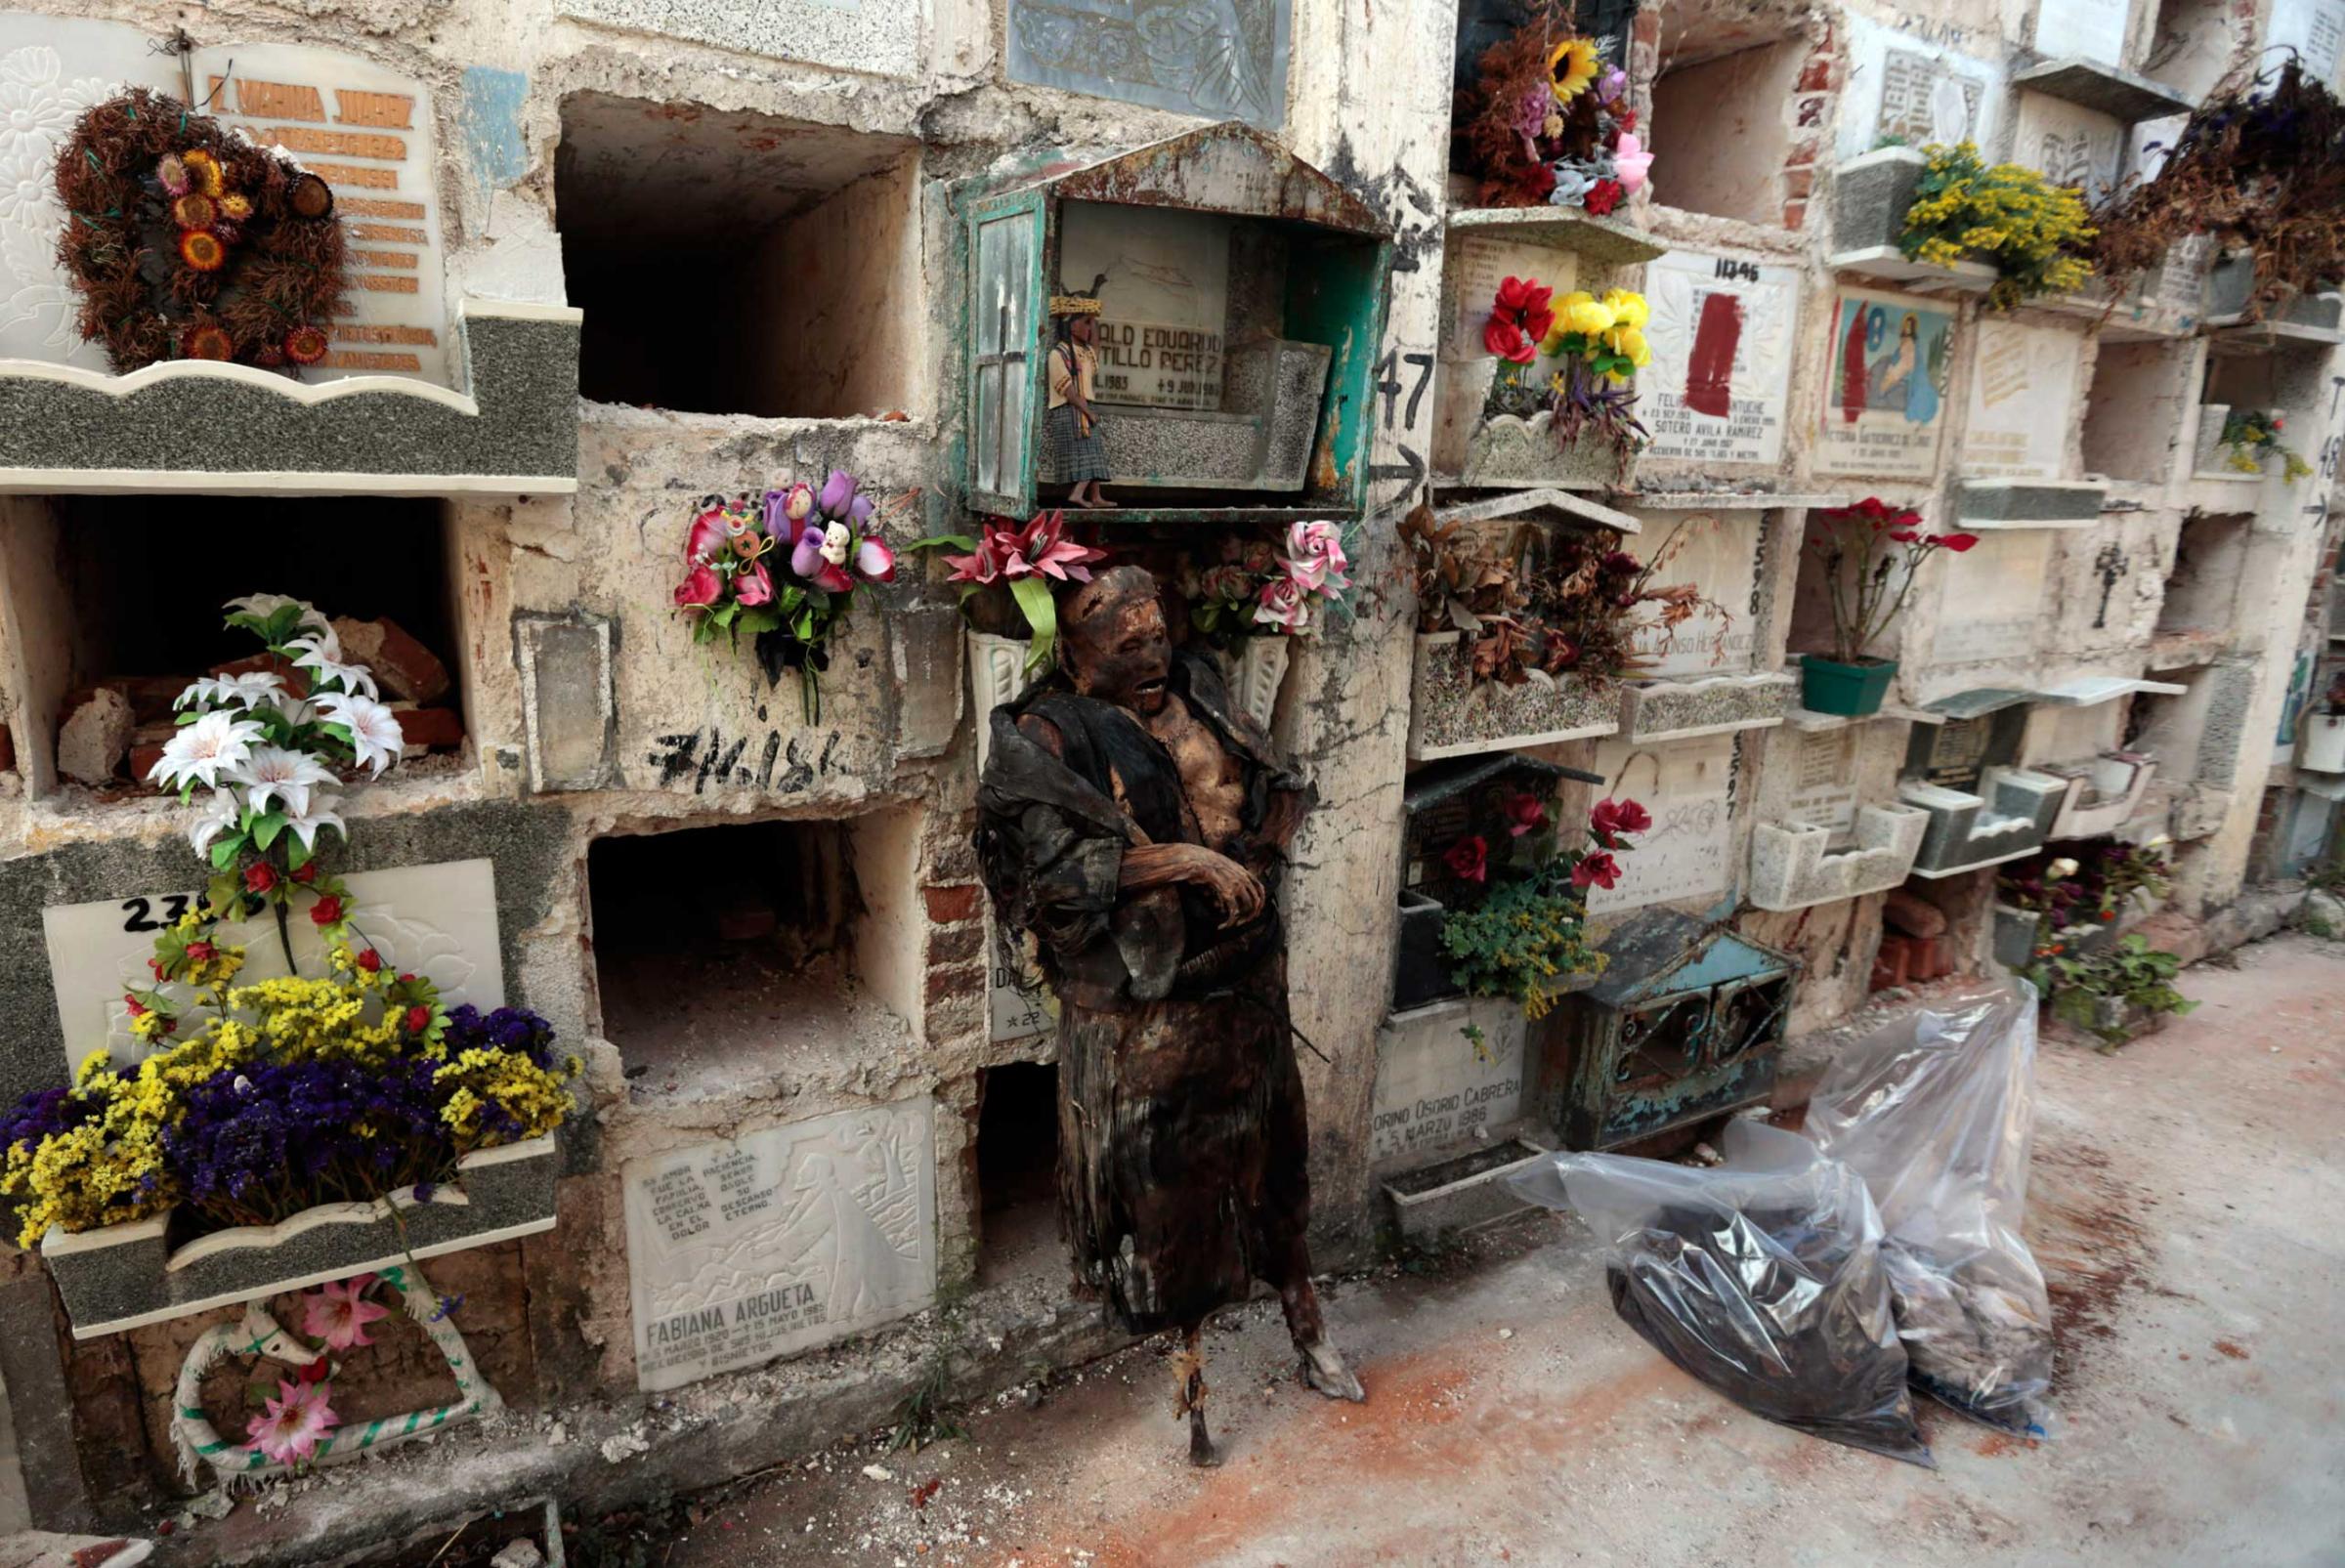 A mummified body is seen leaning on niches after it was exhumed at the municipal cemetery in Guatemala City